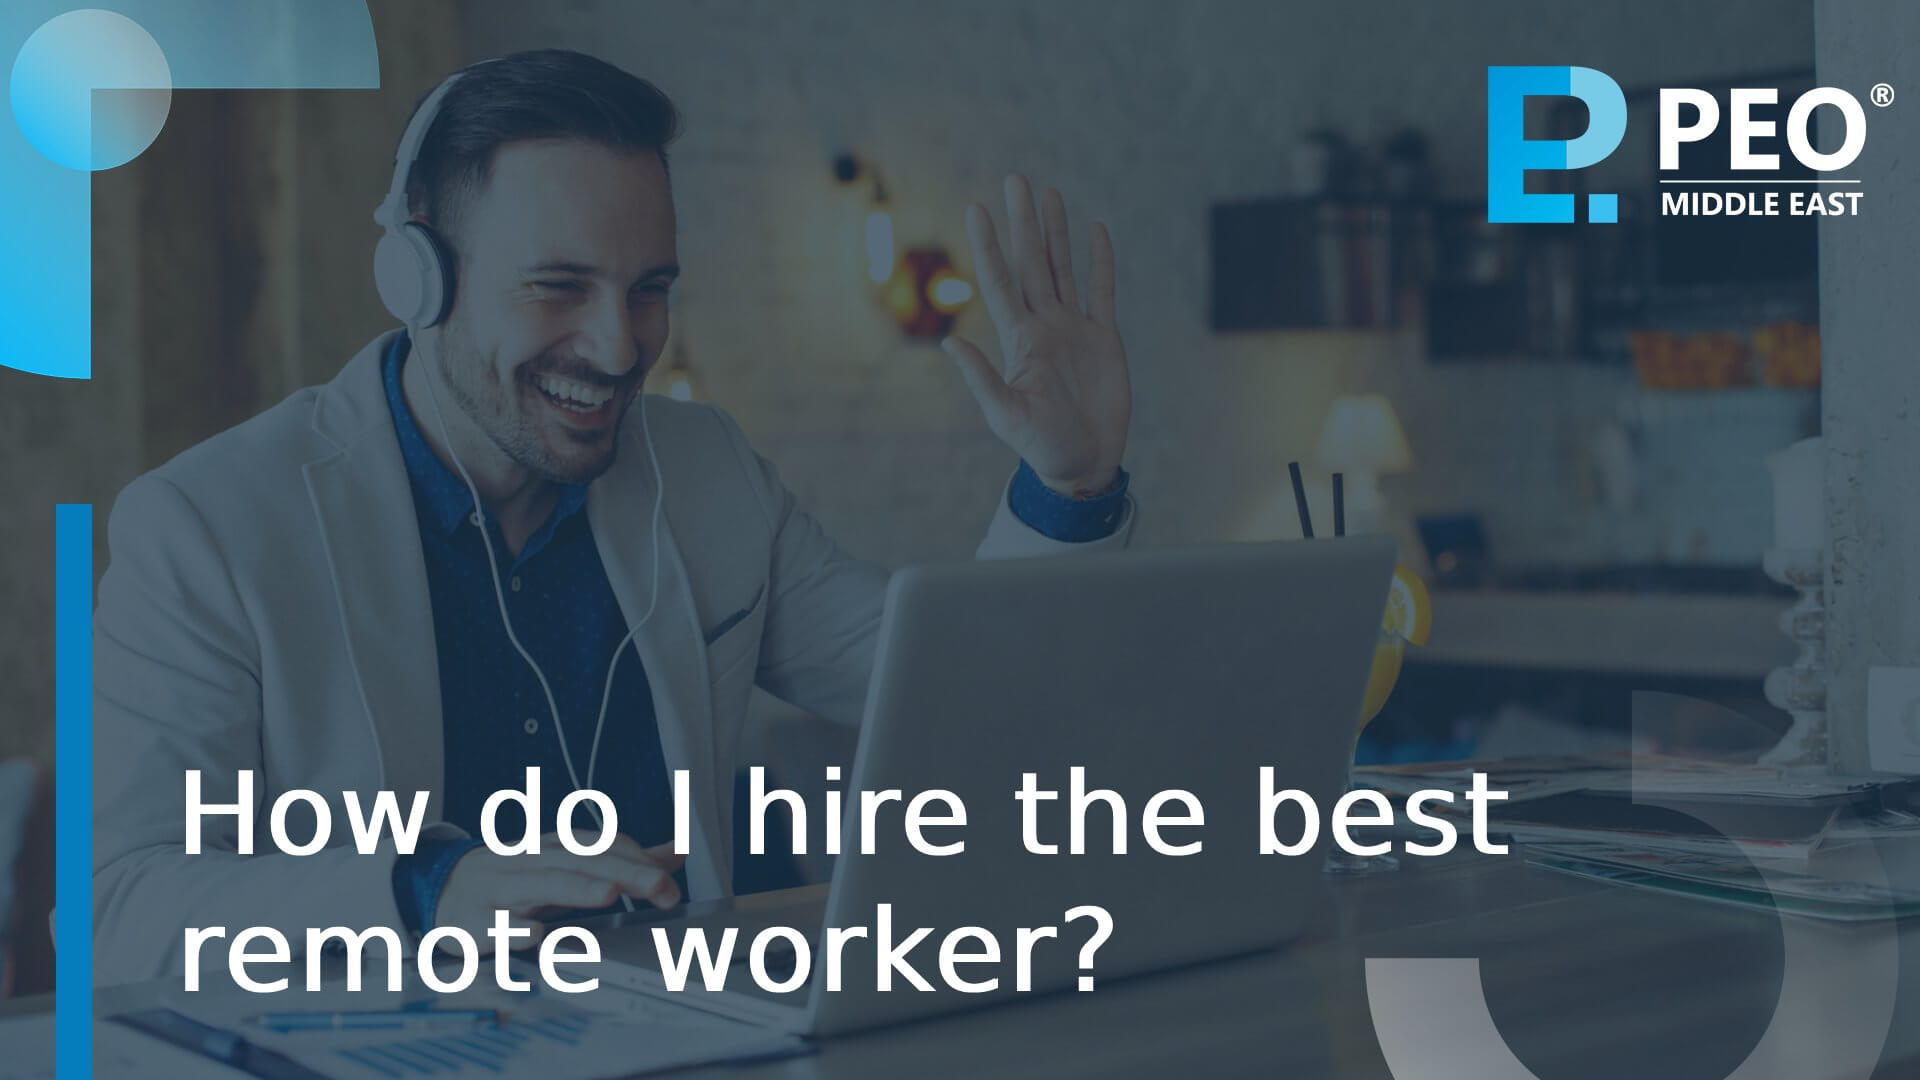 How do I hire the best remote worker?